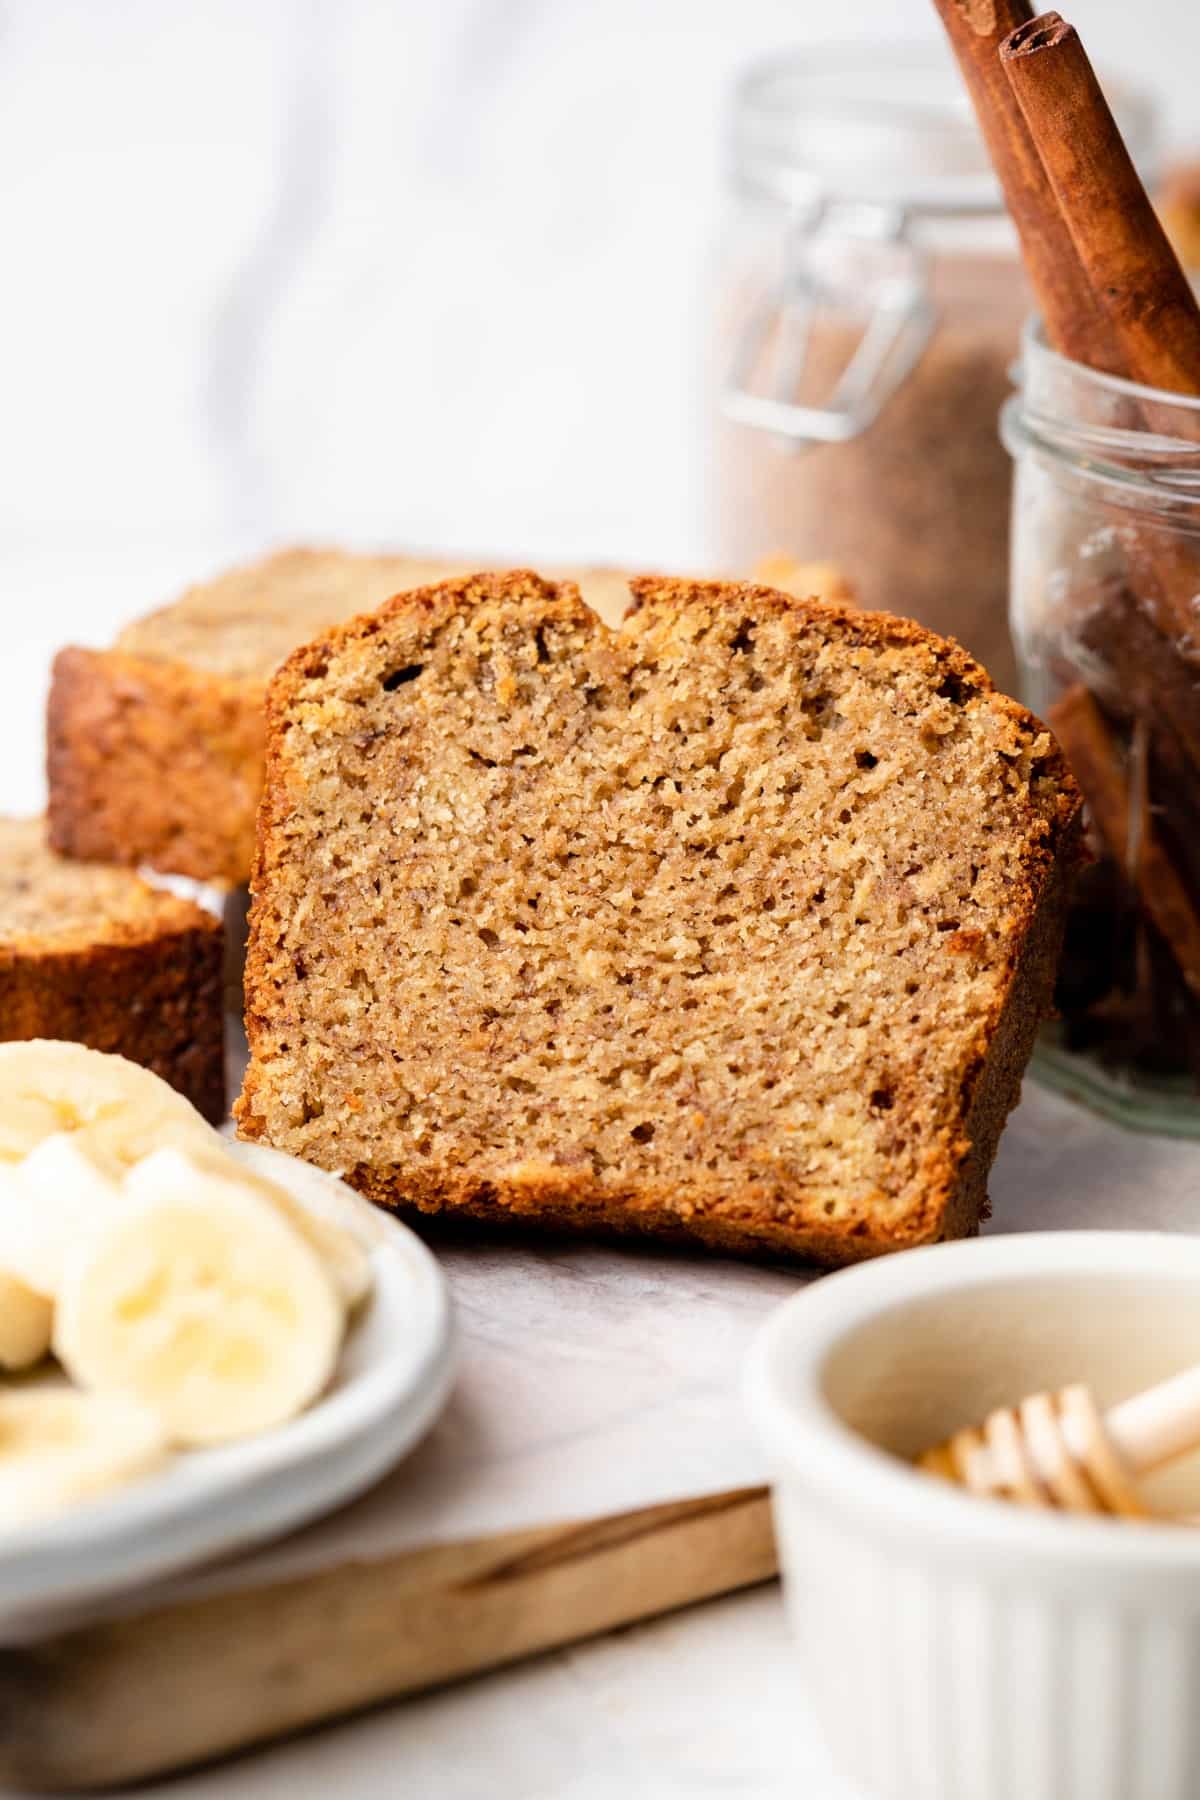 A slice of soft and moist banana bread.